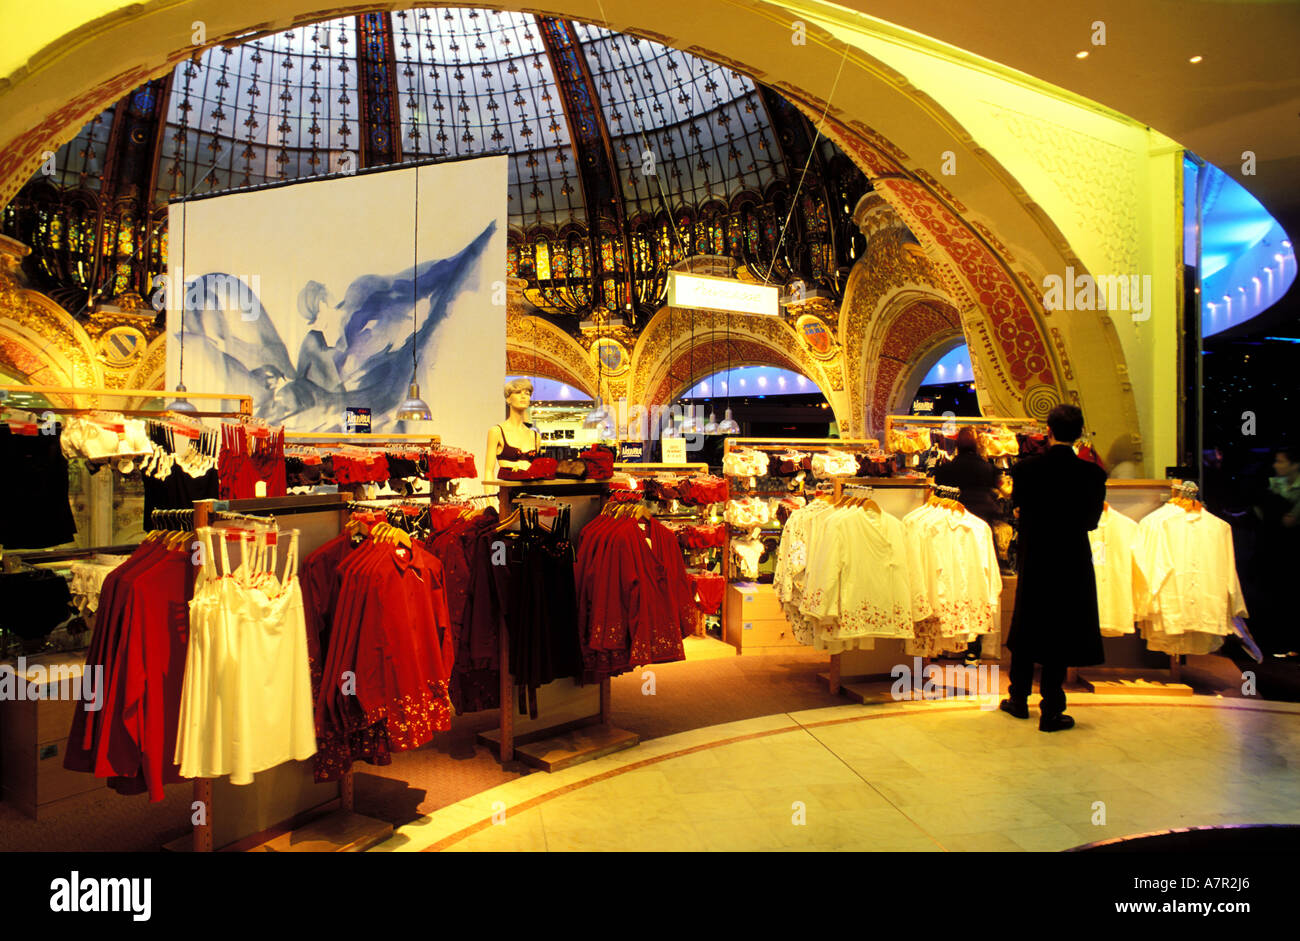 France, Paris, fashion show under the dome of Galeries Lafayette department store Stock Photo